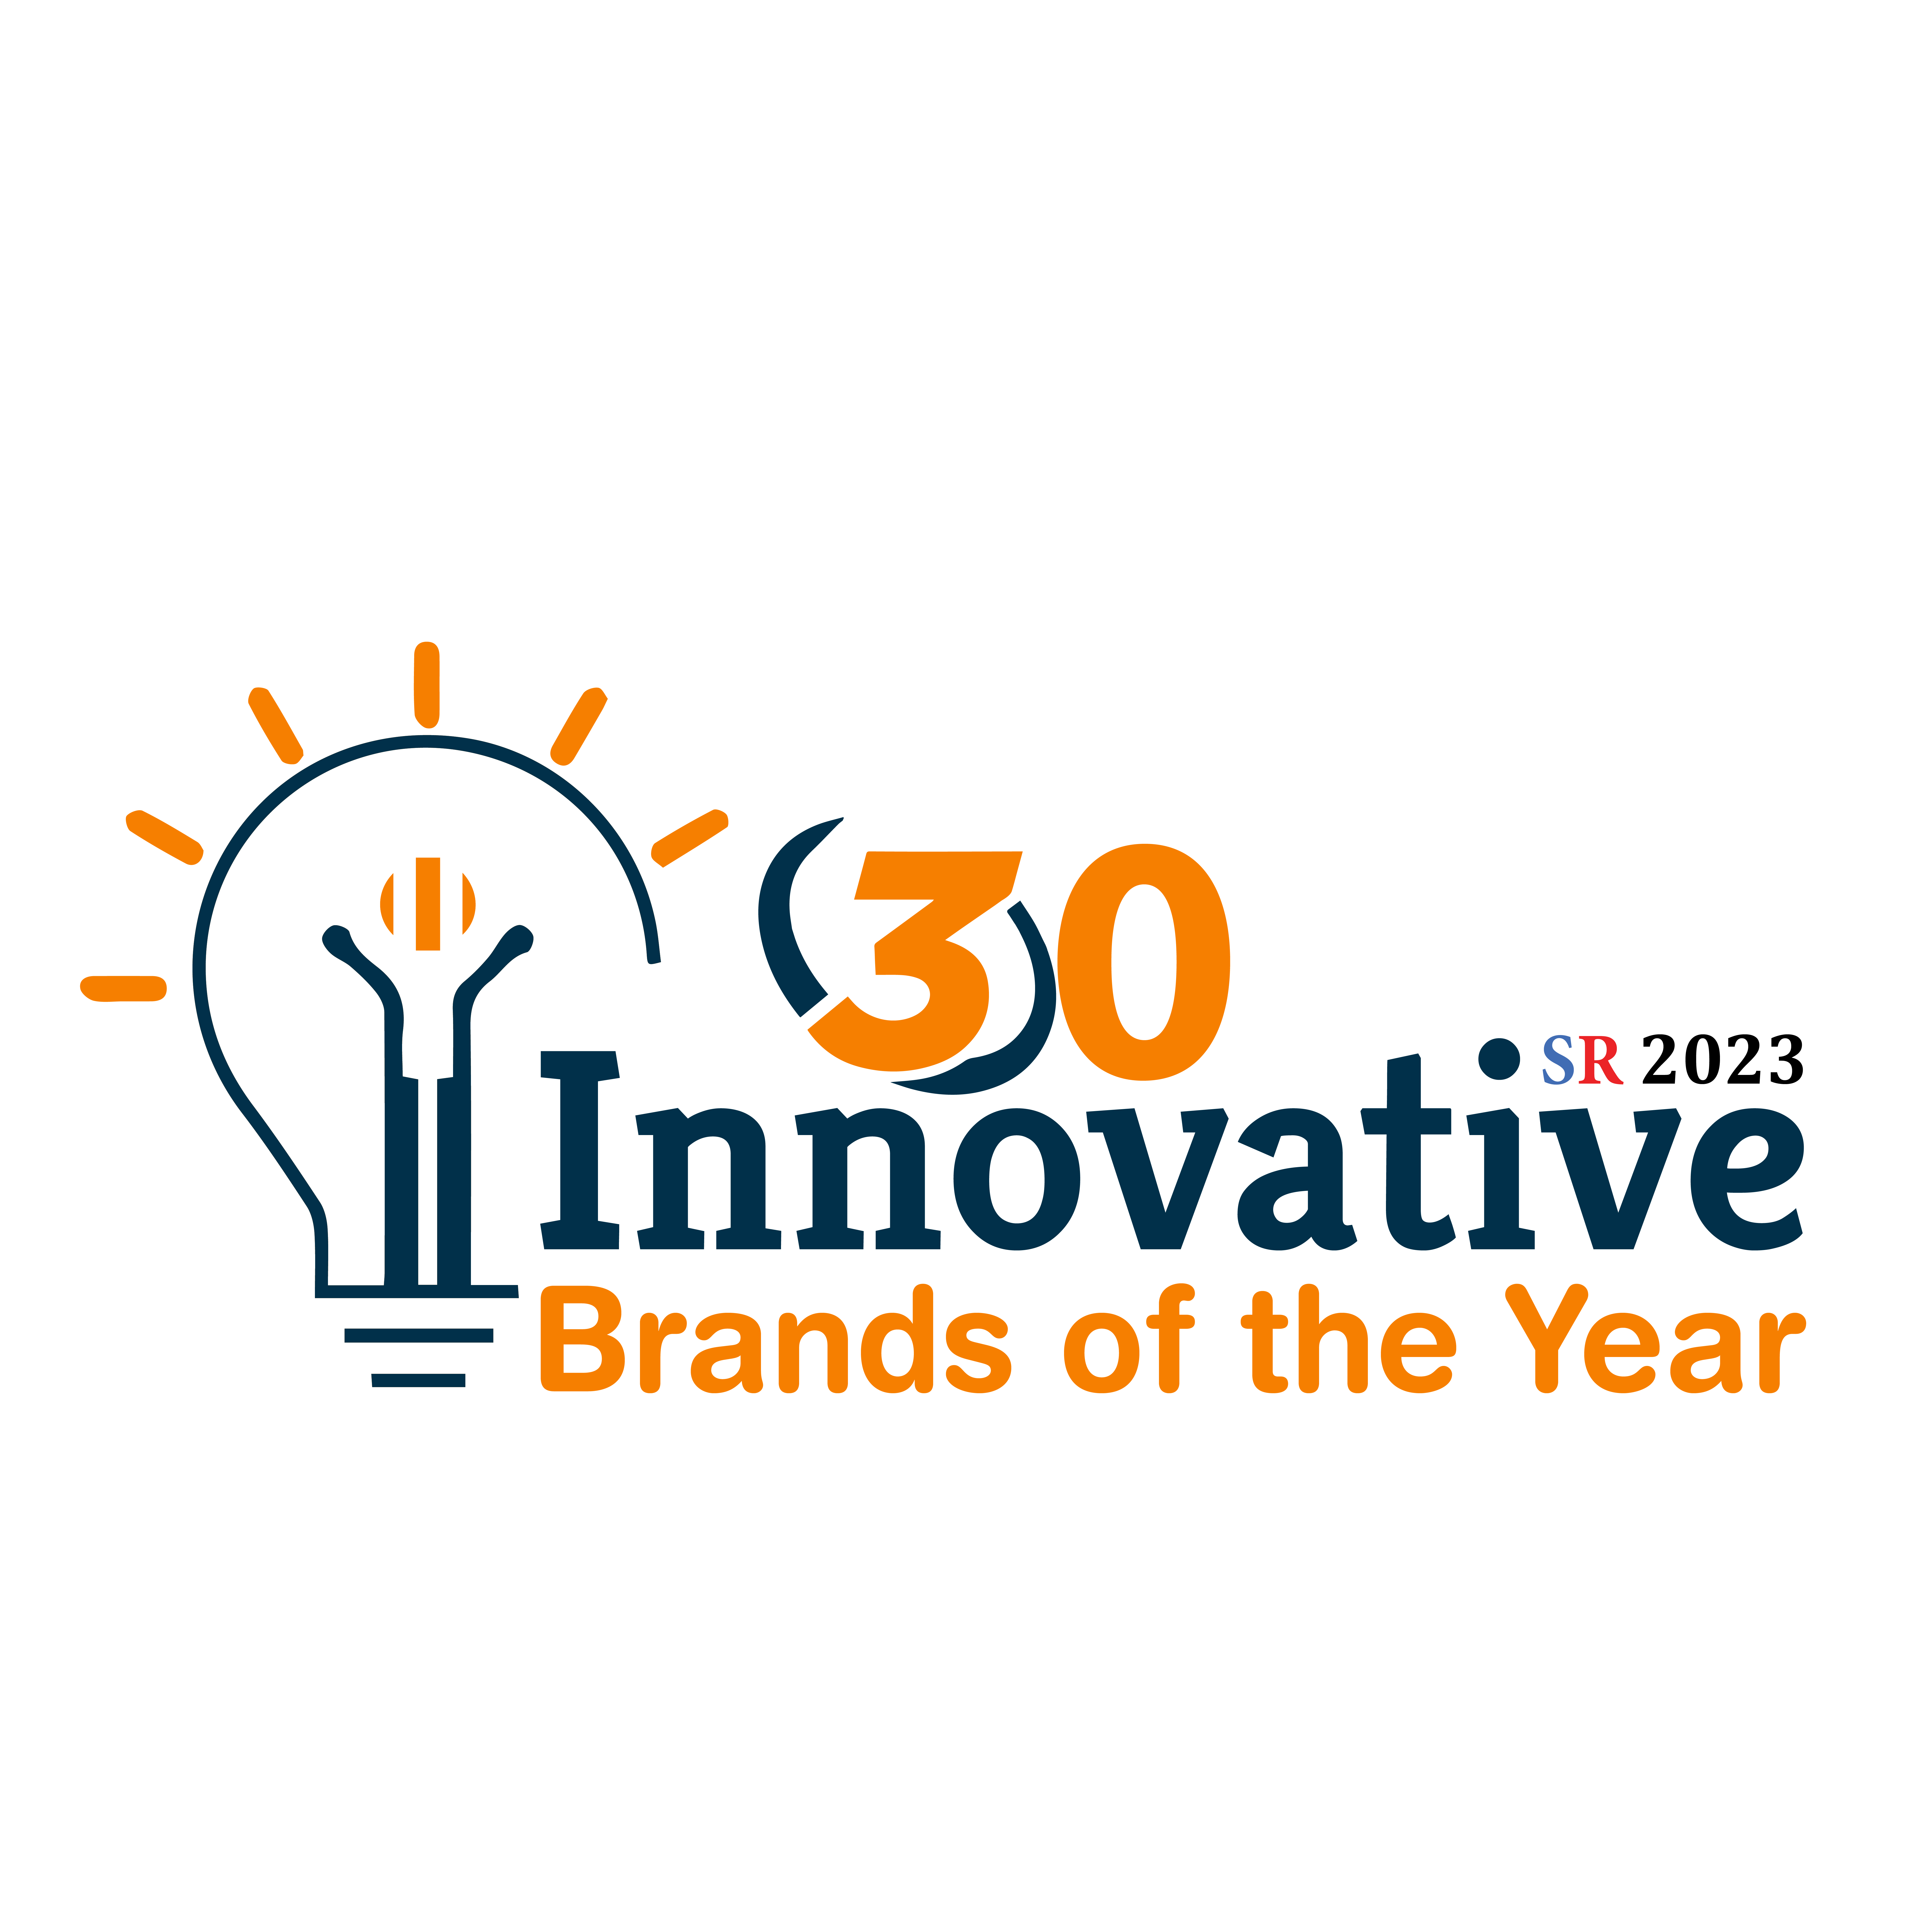 FAITH WORKS CONSULTING RECOGNIZED AMONG 30 INNOVATIVE BRANDS FOR THE YEAR 2023